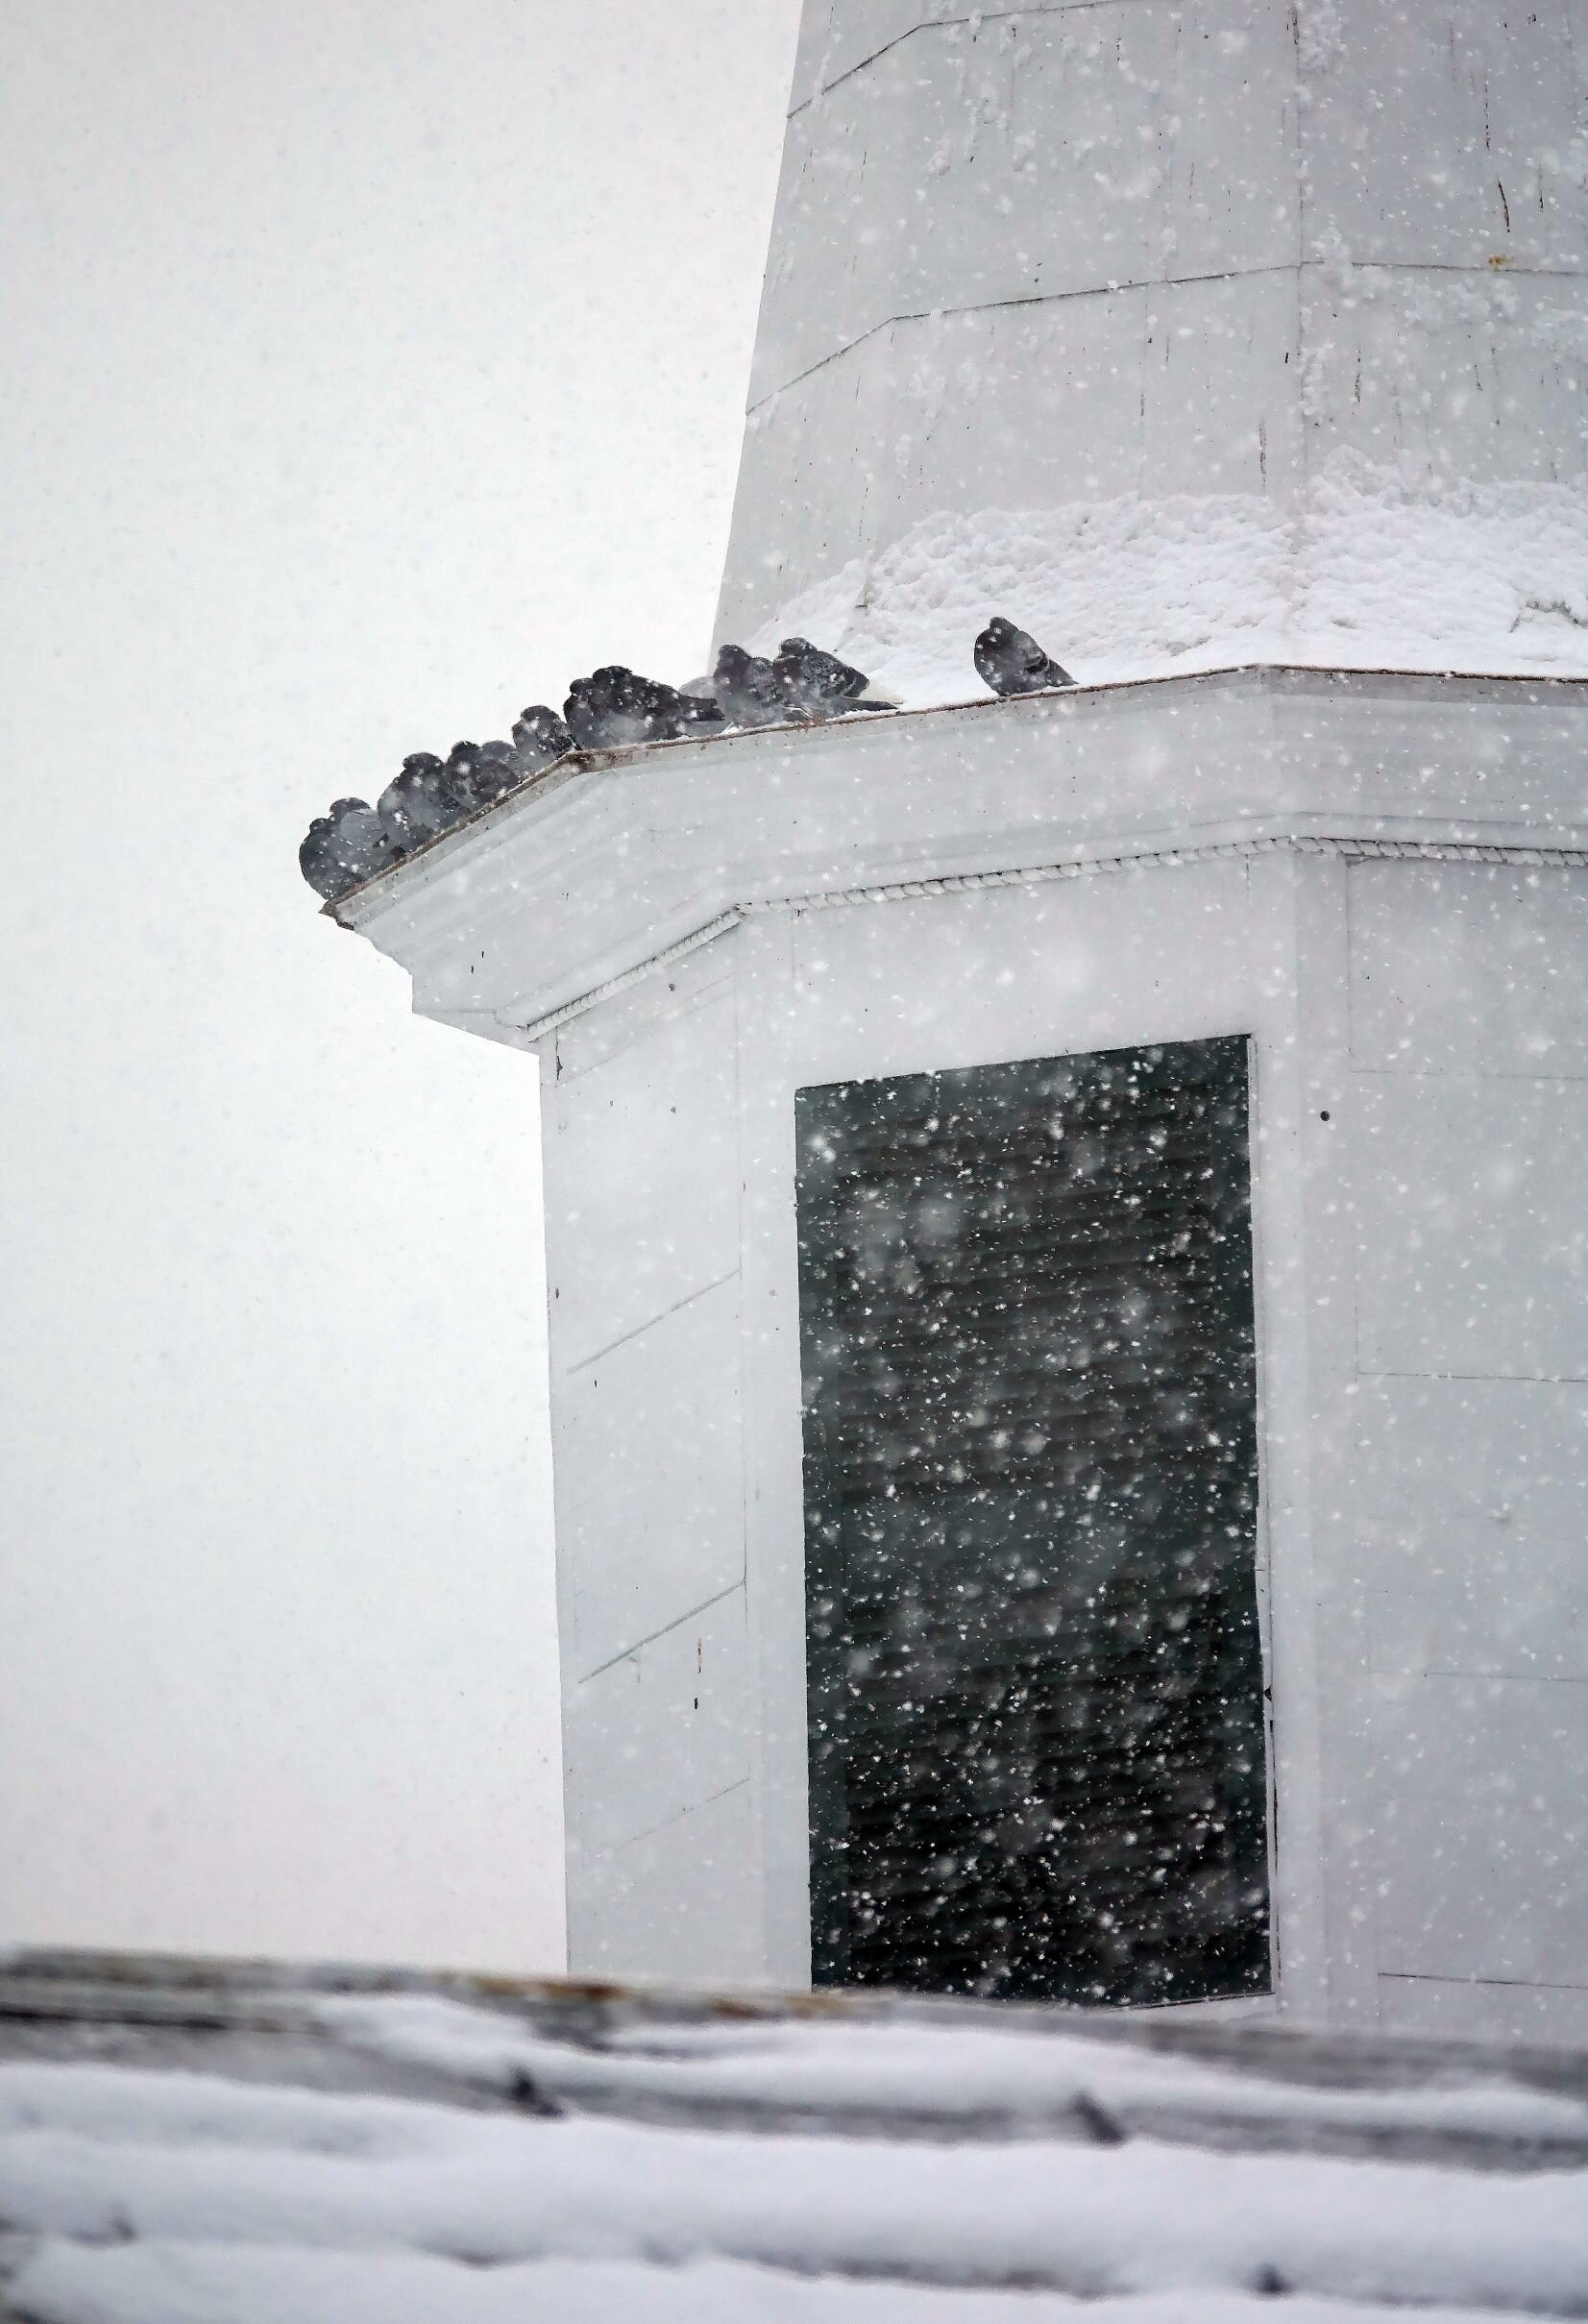   Pigeons huddle together atop a church spire for warmth. Birds don’t need to social distance. Photo by Gordon Miller.    